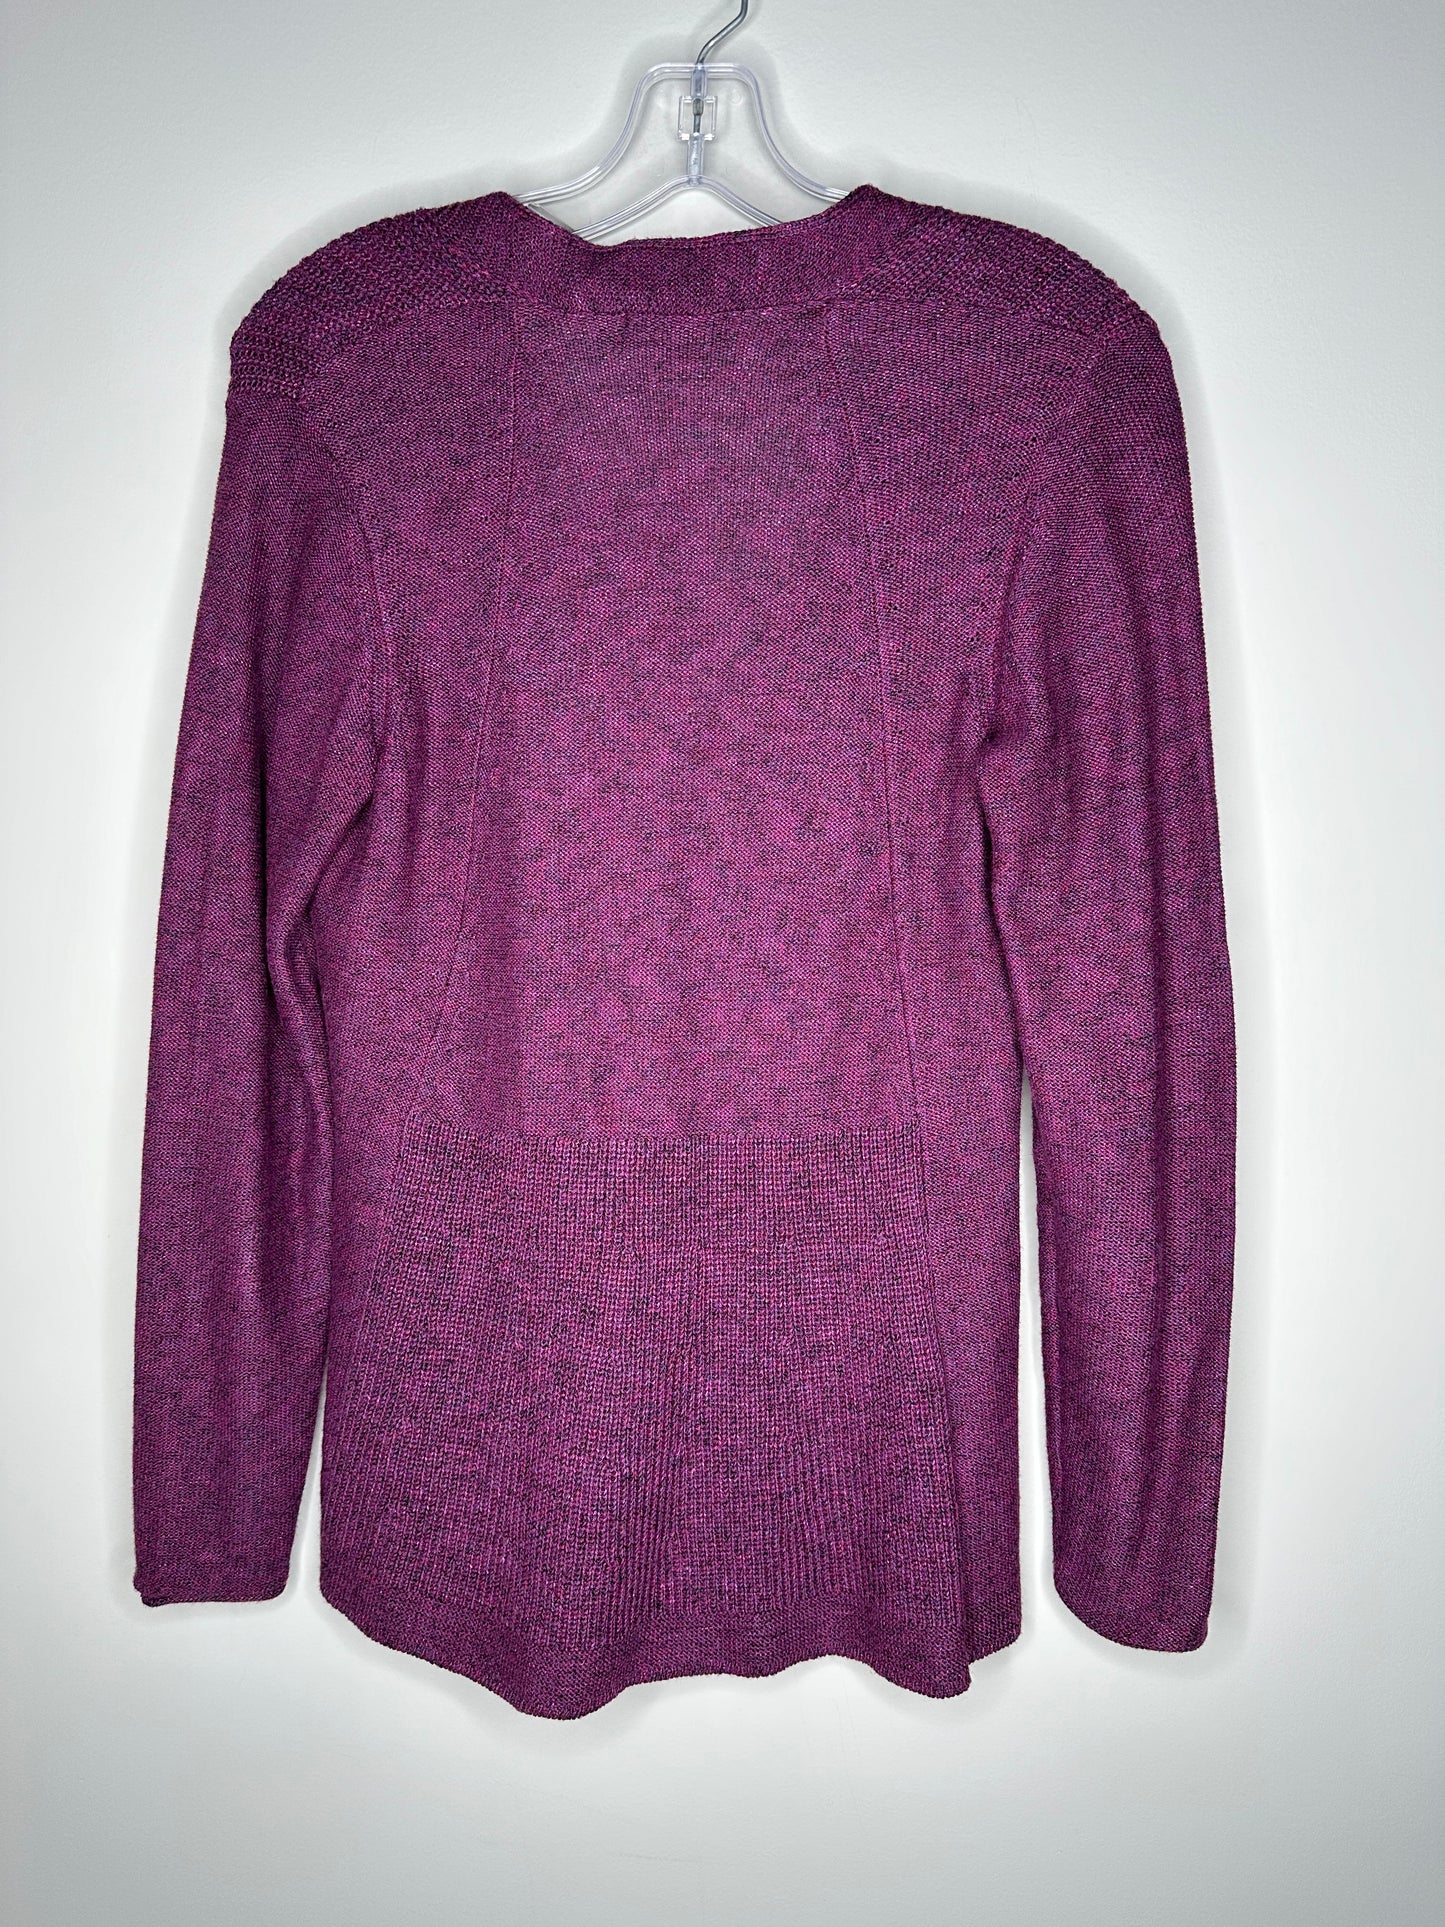 Nic+Zoe Size XS Marbled Plum Magenta Single-Button Cardigan Sweater Duster